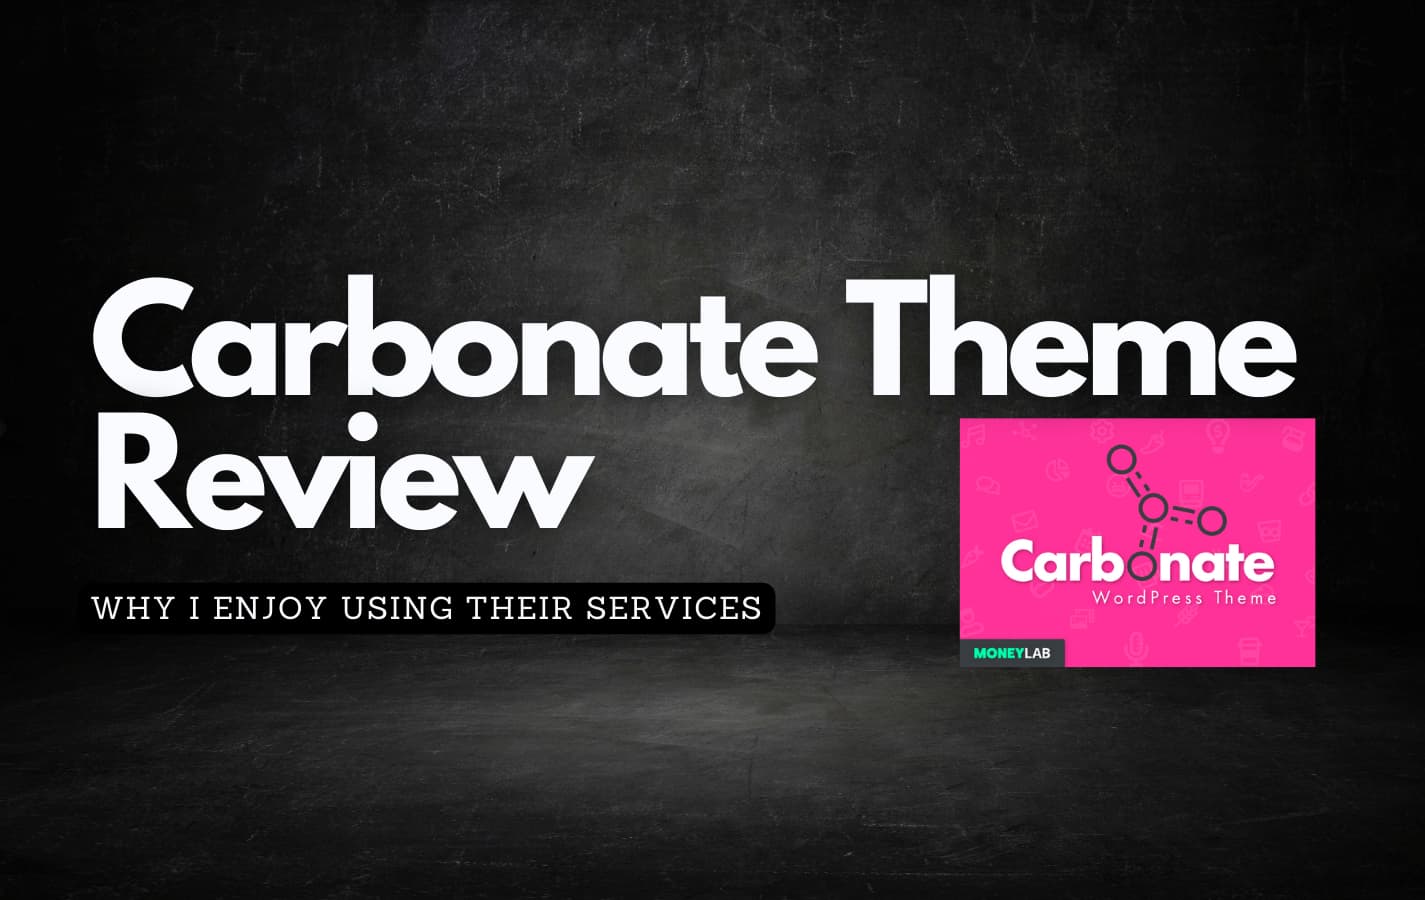 Carbonate logo against a dark background with the text talking about why carbonate is a perfect affiliate focused theme